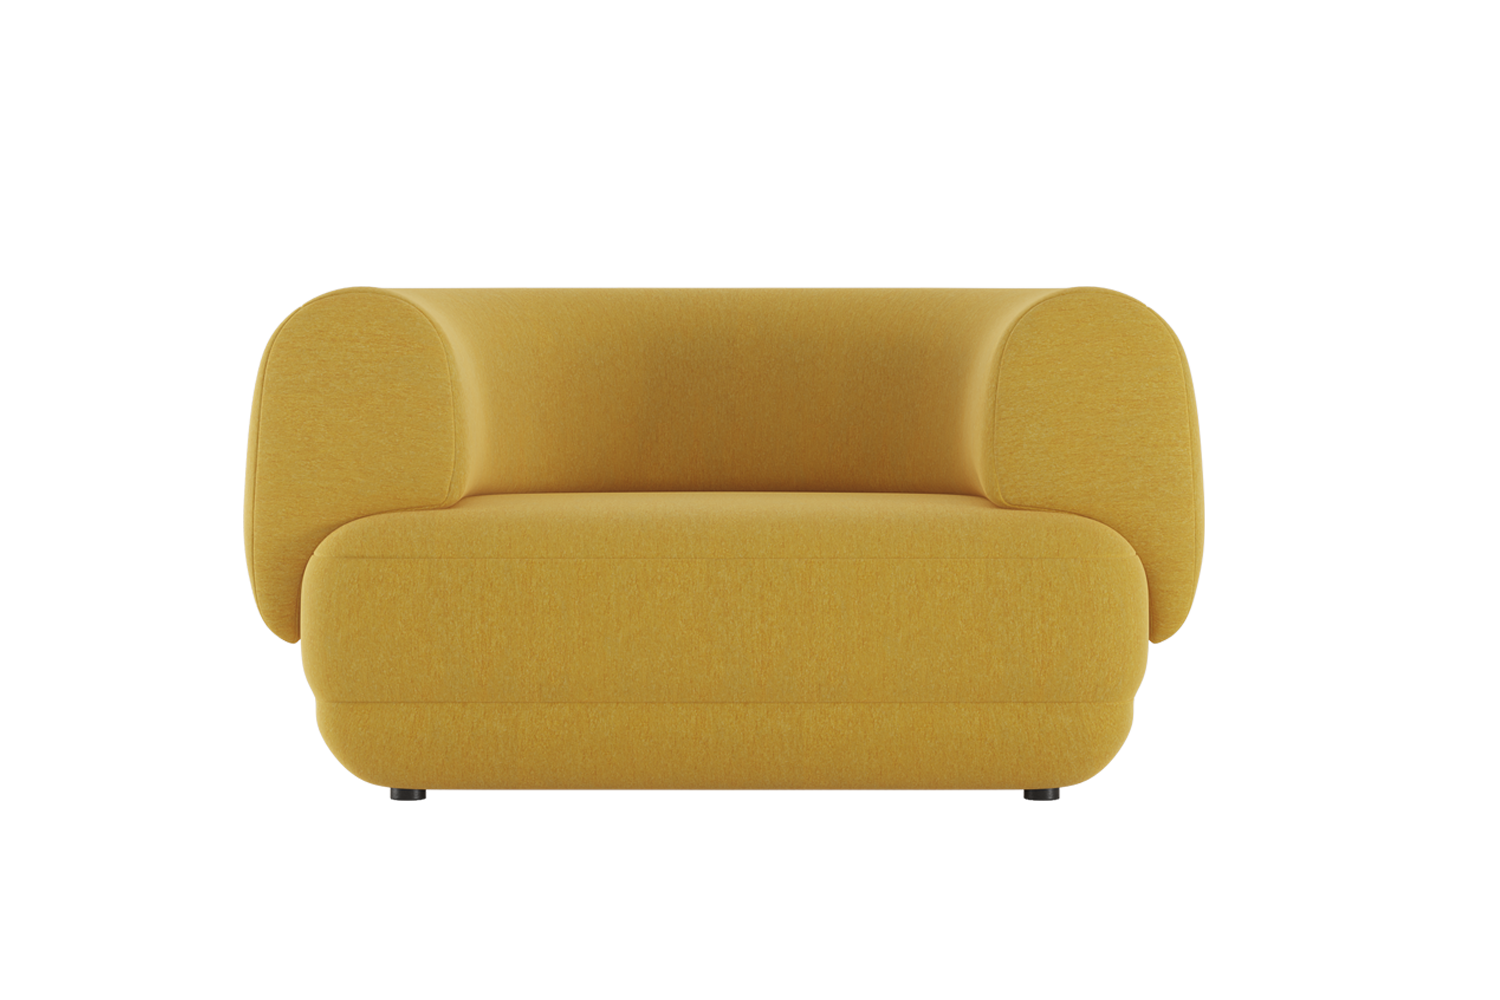 Blafink's Perel Curved Armchair in a shade of yellow.